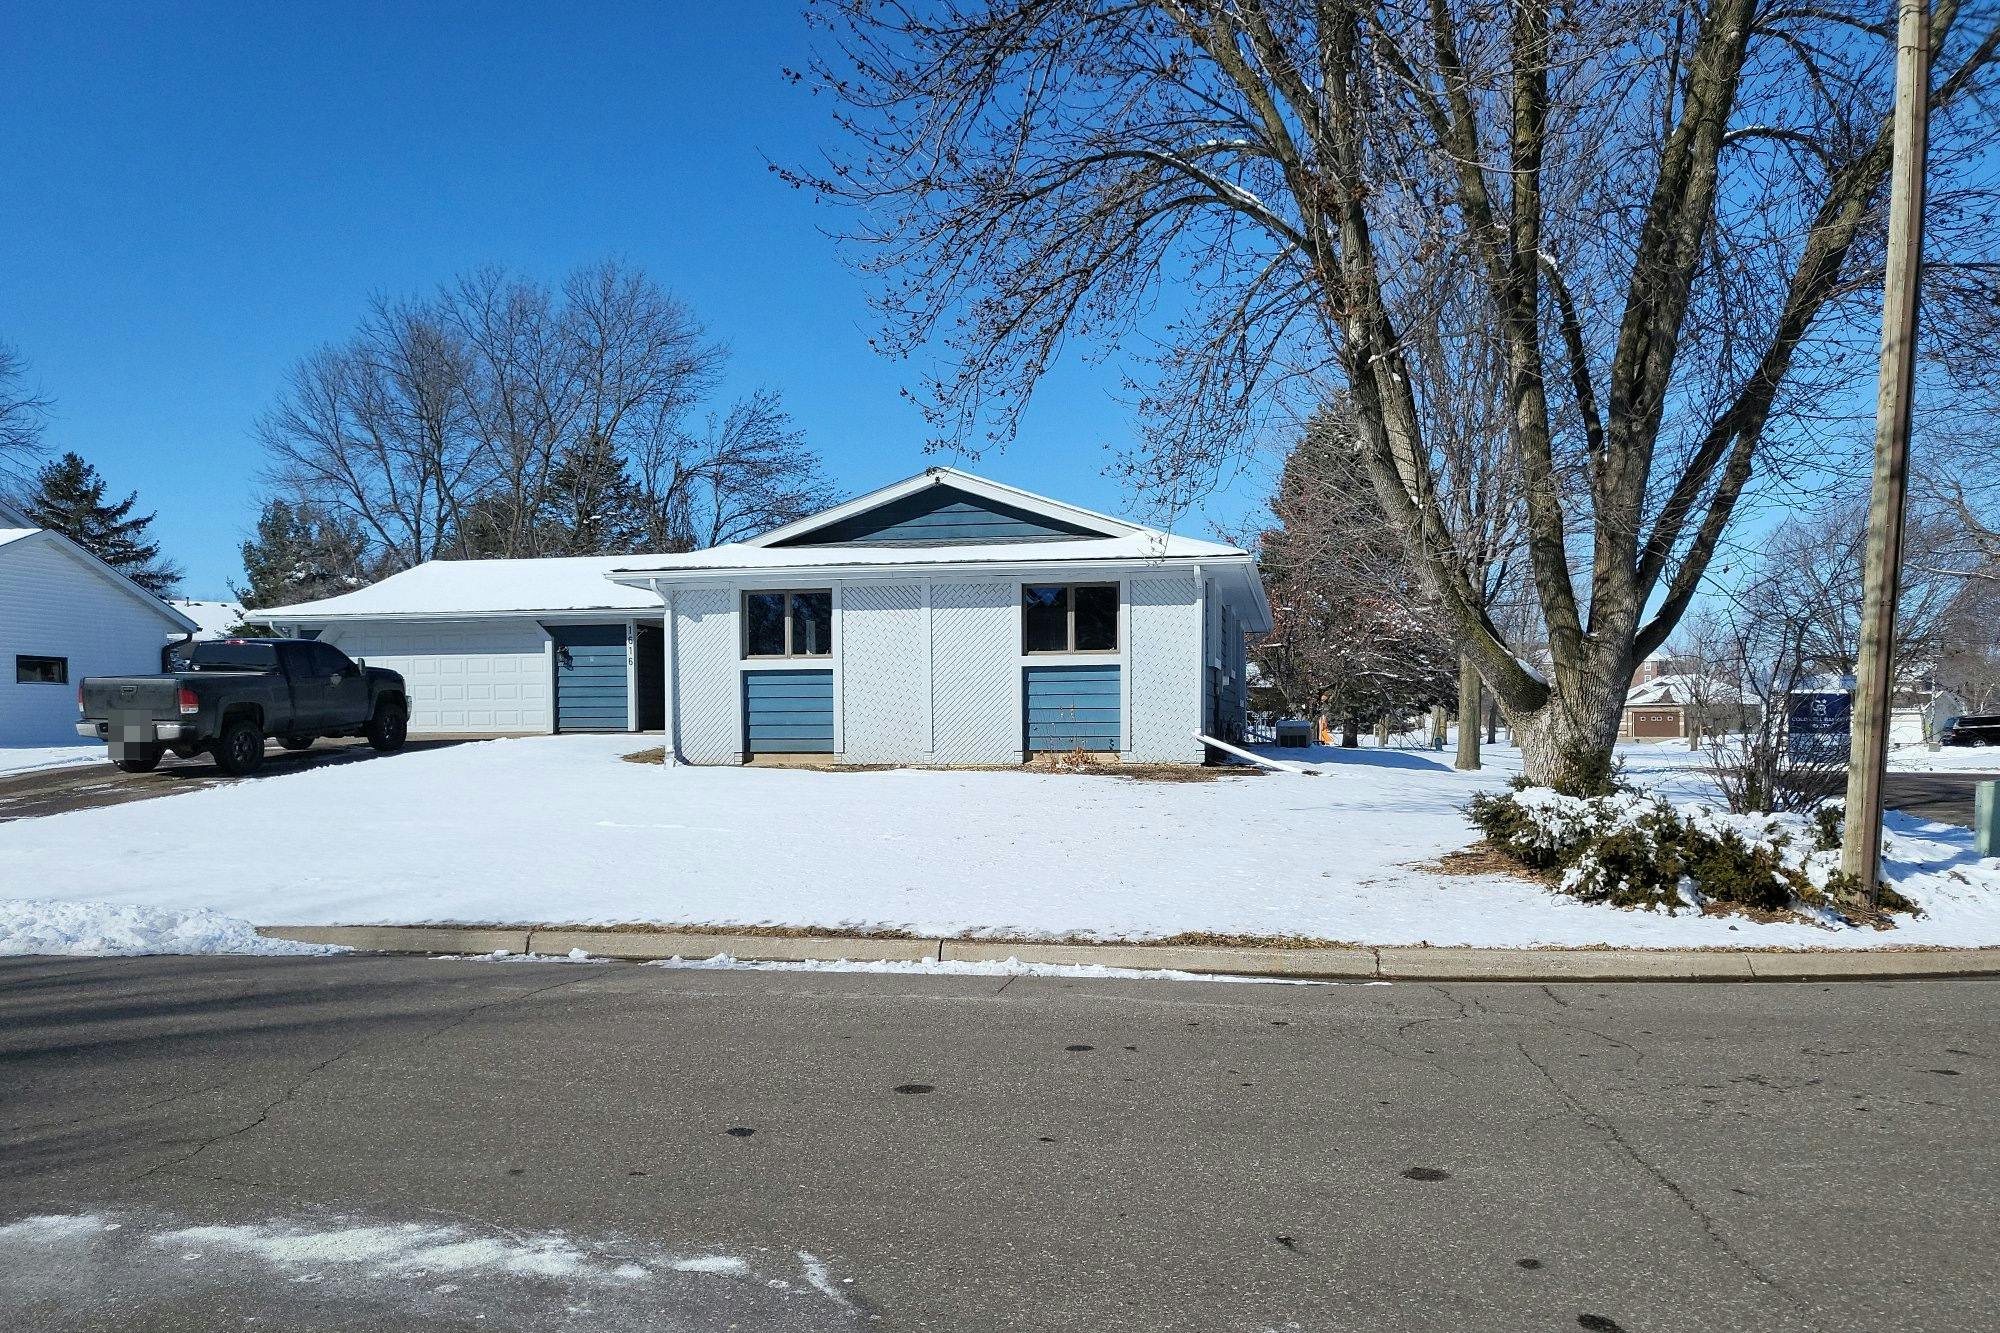 Todd Ct, Hastings, MN 55033 #1